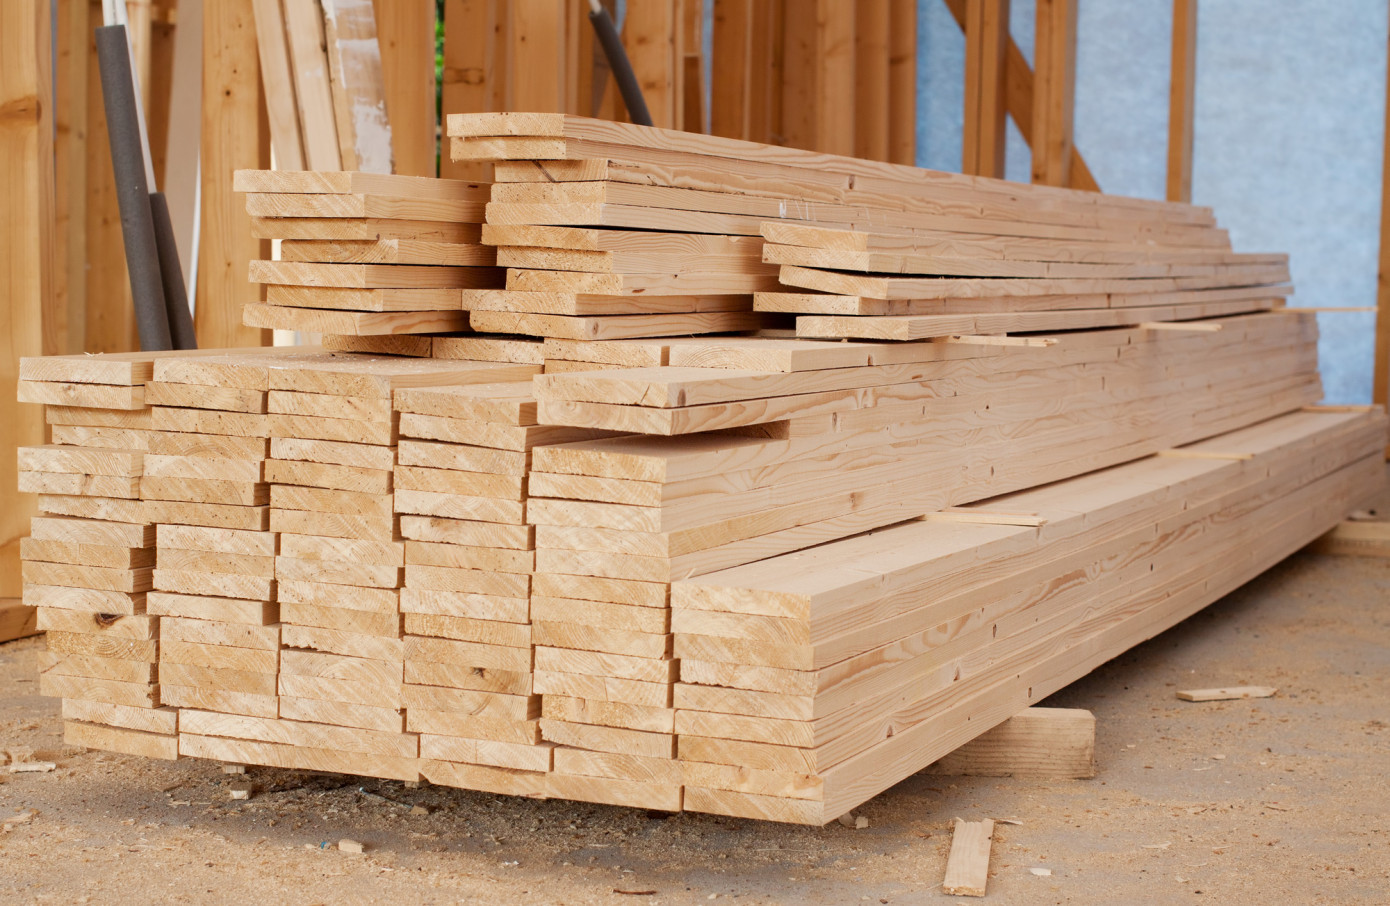 Art-Market plans to export up to 1500 m3 of lumber monthly